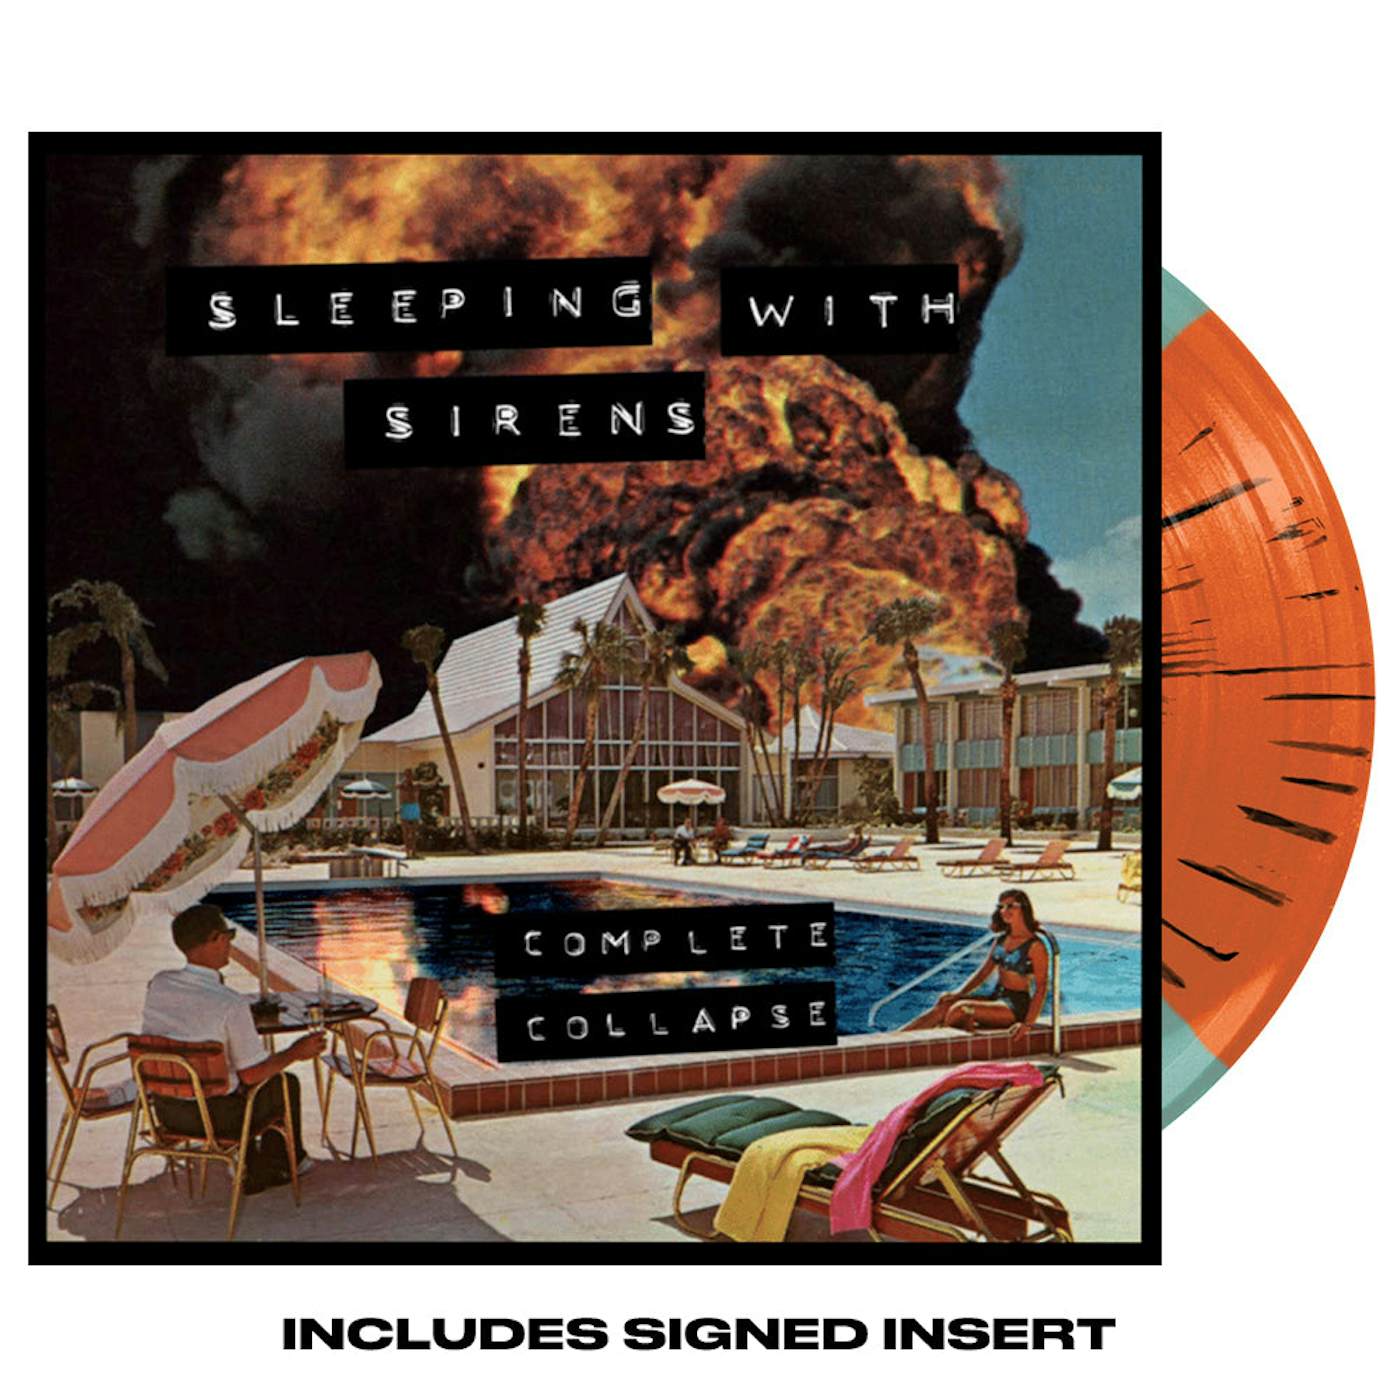 Sleeping With Sirens - 'Complete Collapse' Electric Blue + Orange Butterfly w/ Black Splatter Vinyl w/ Signed Insert